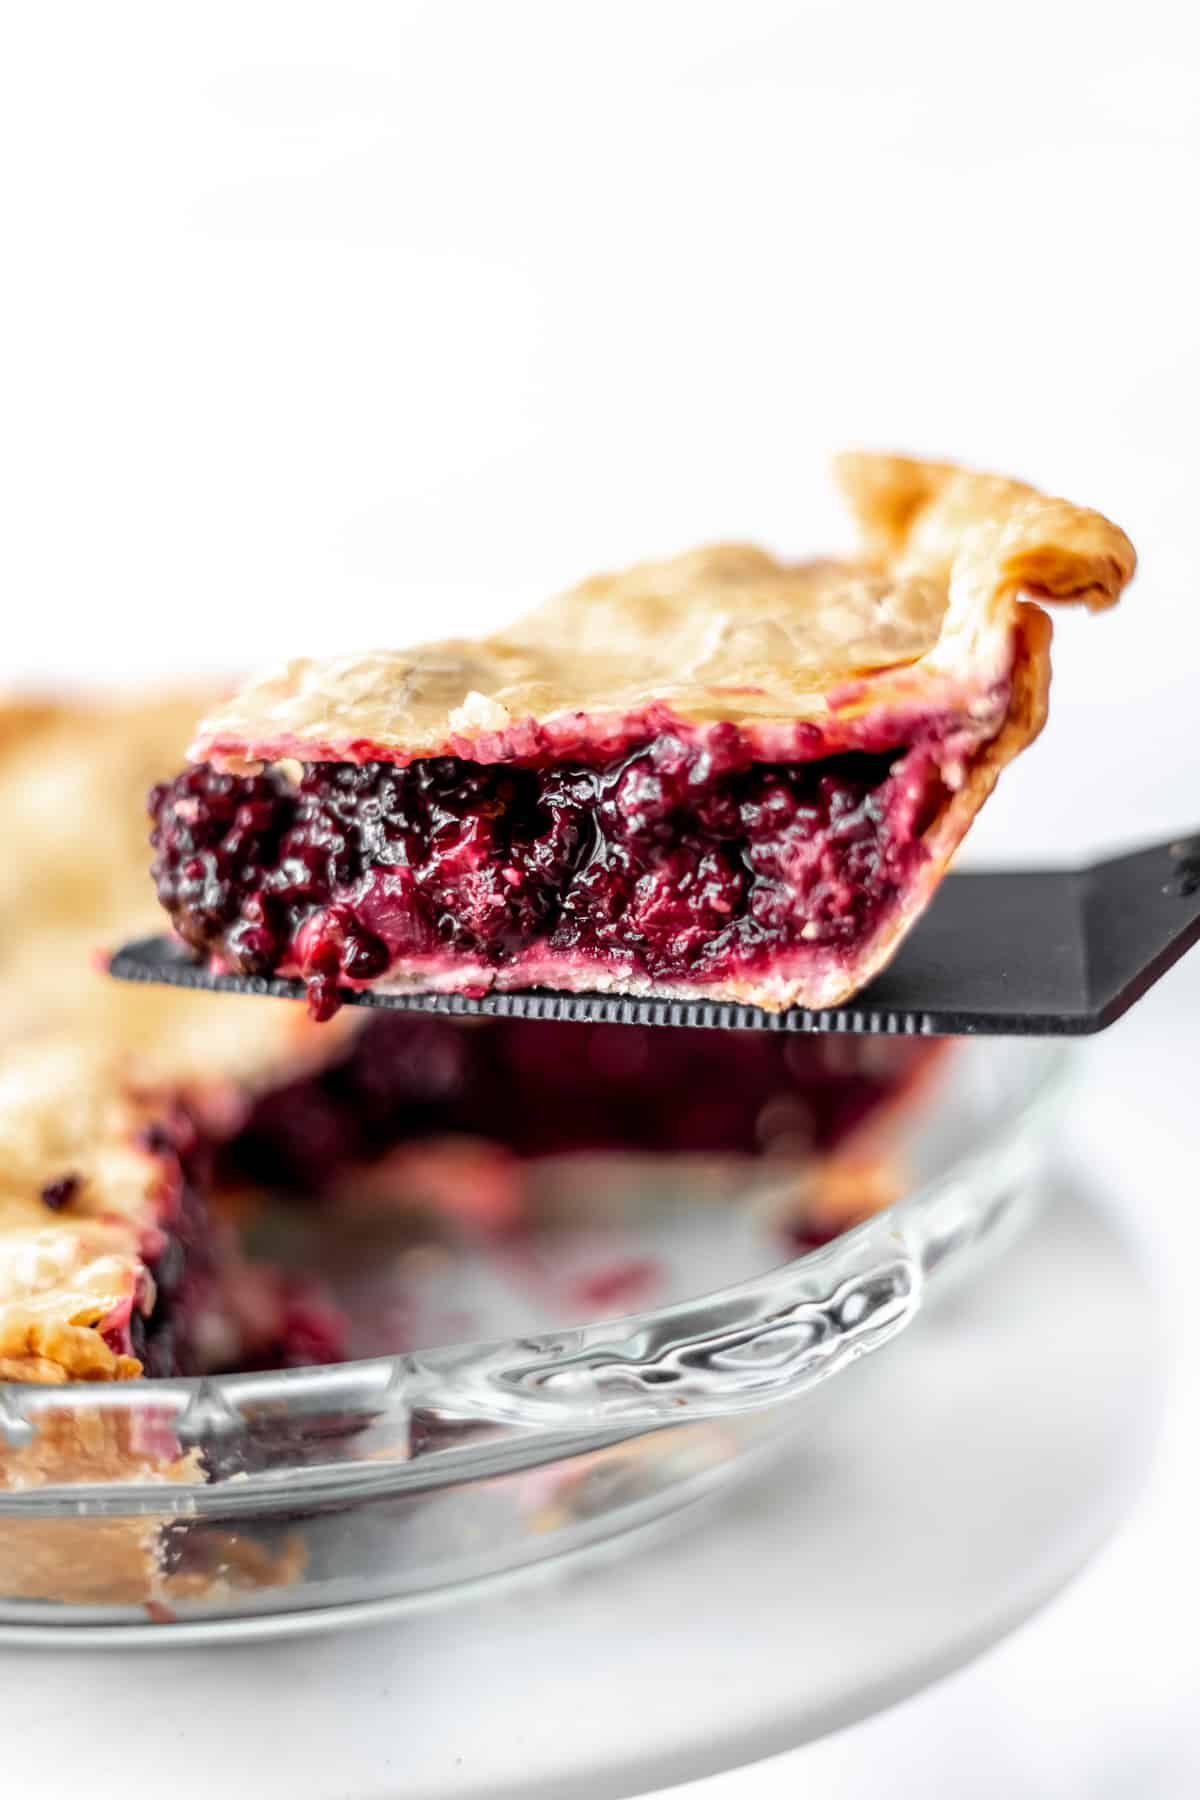 A slice of blackberry pie being lifted up over the pie plate.